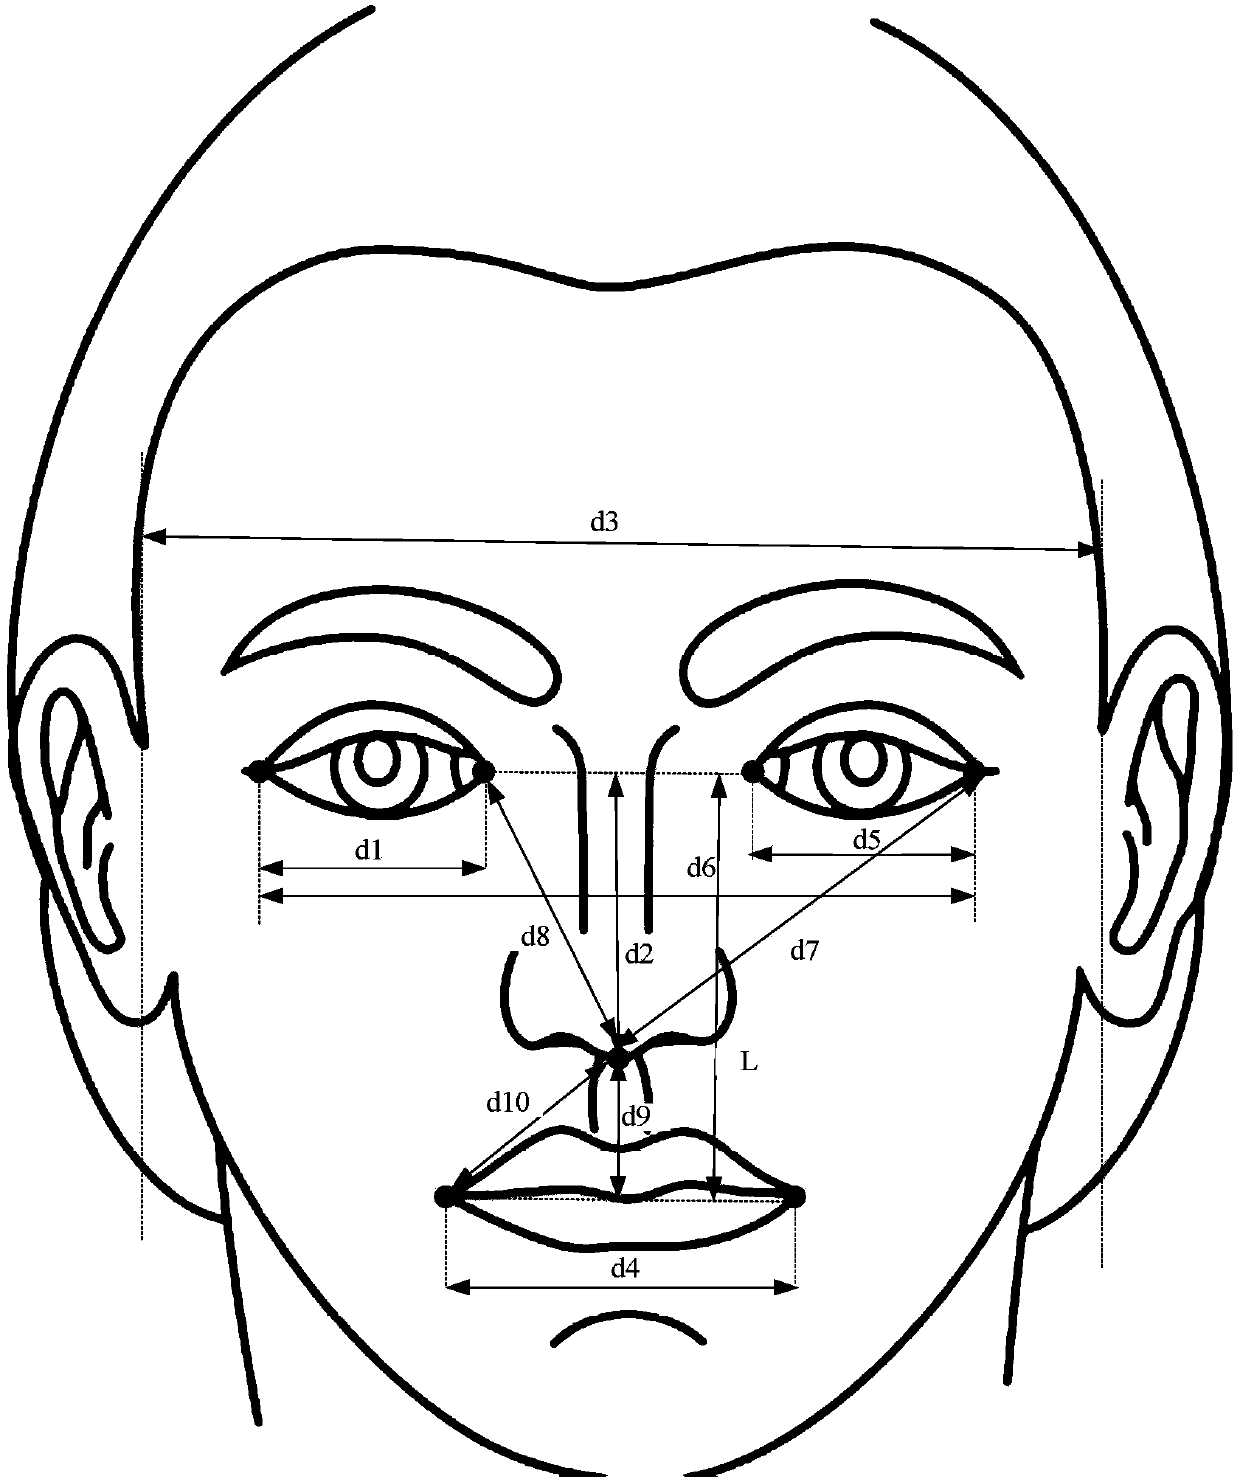 Method for quickly recognizing face